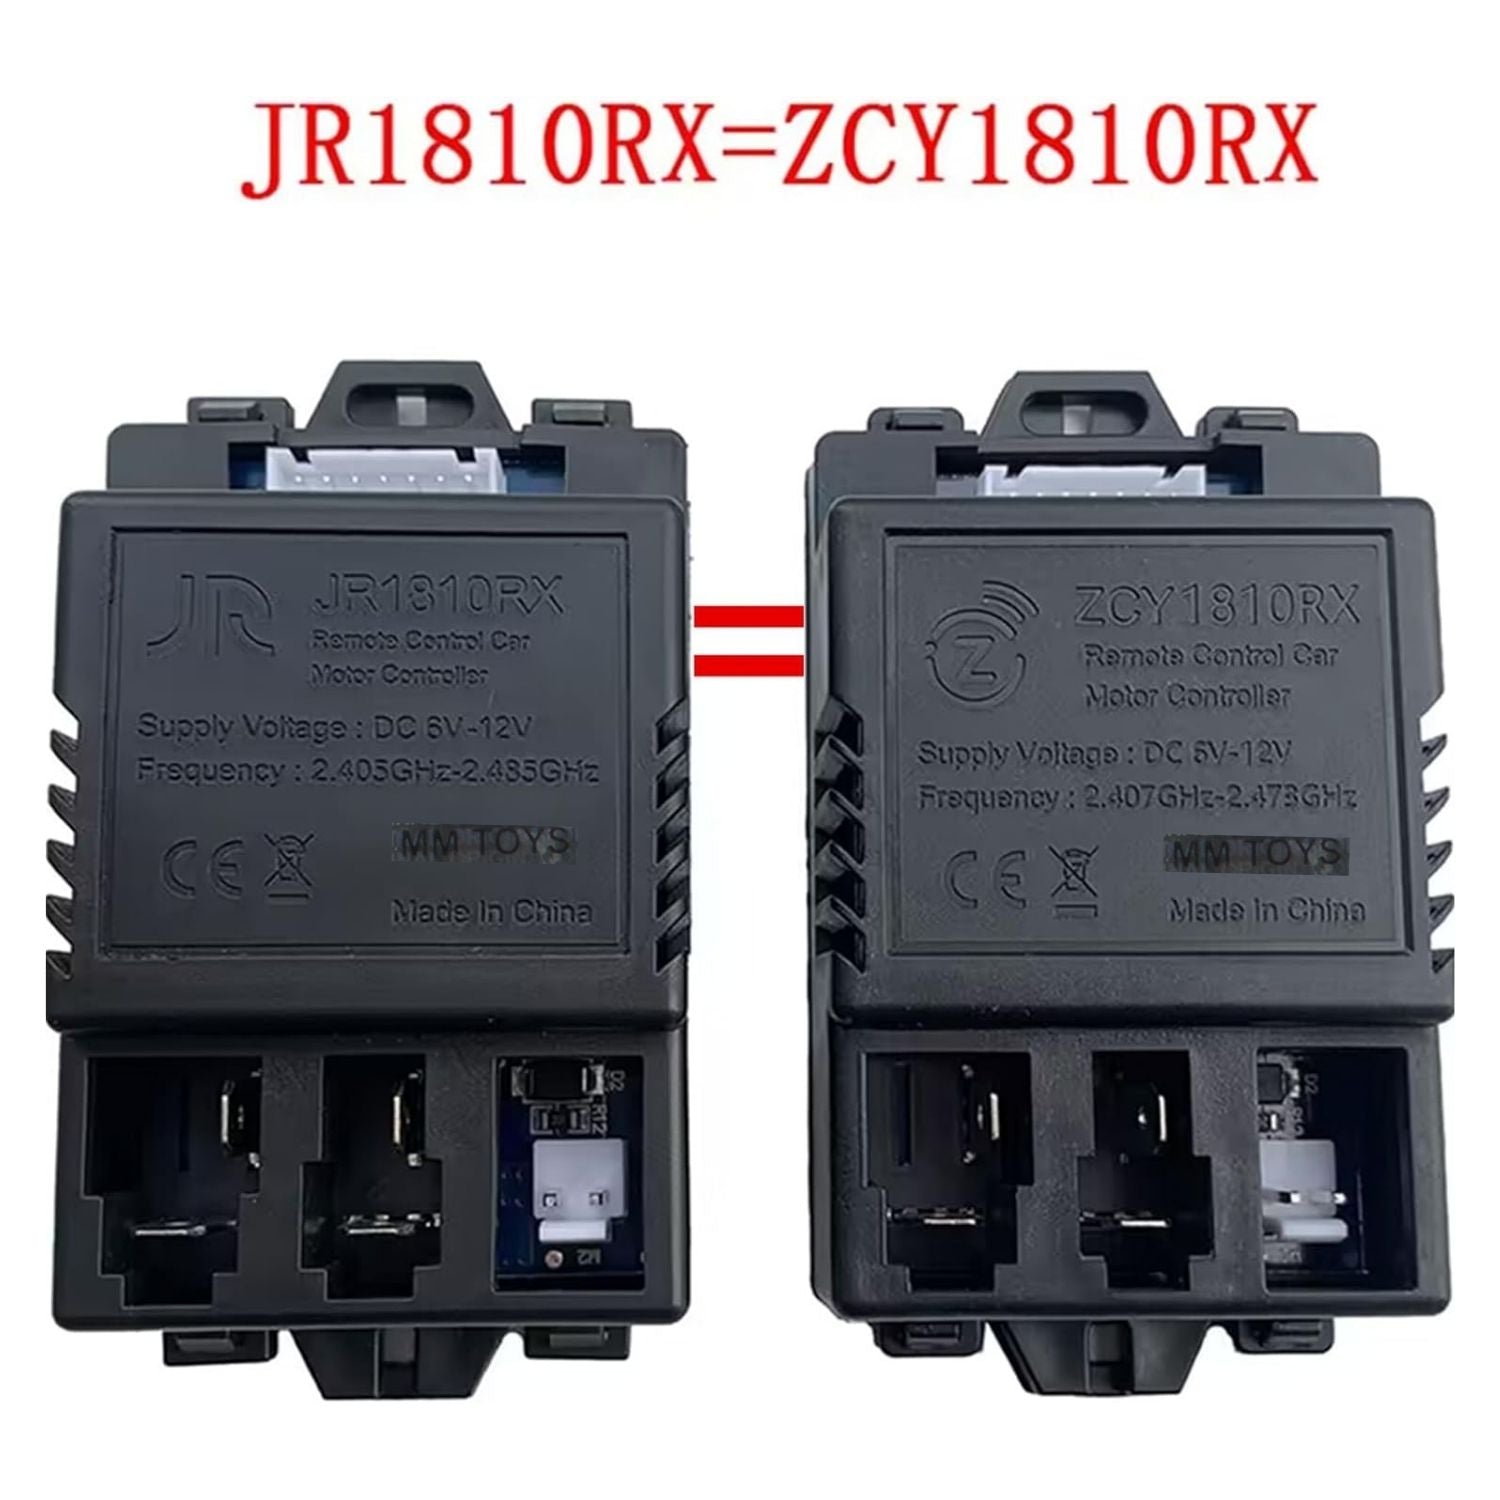 MM TOYS 7 Pin JR1810RX ( ZCY1810 RX ) Reciever 2.4Ghz Control Car Motor Pin Compatible With 6V And 12V Both Reciever Control Box For Kids Electric Car Jeeps Ride- Black